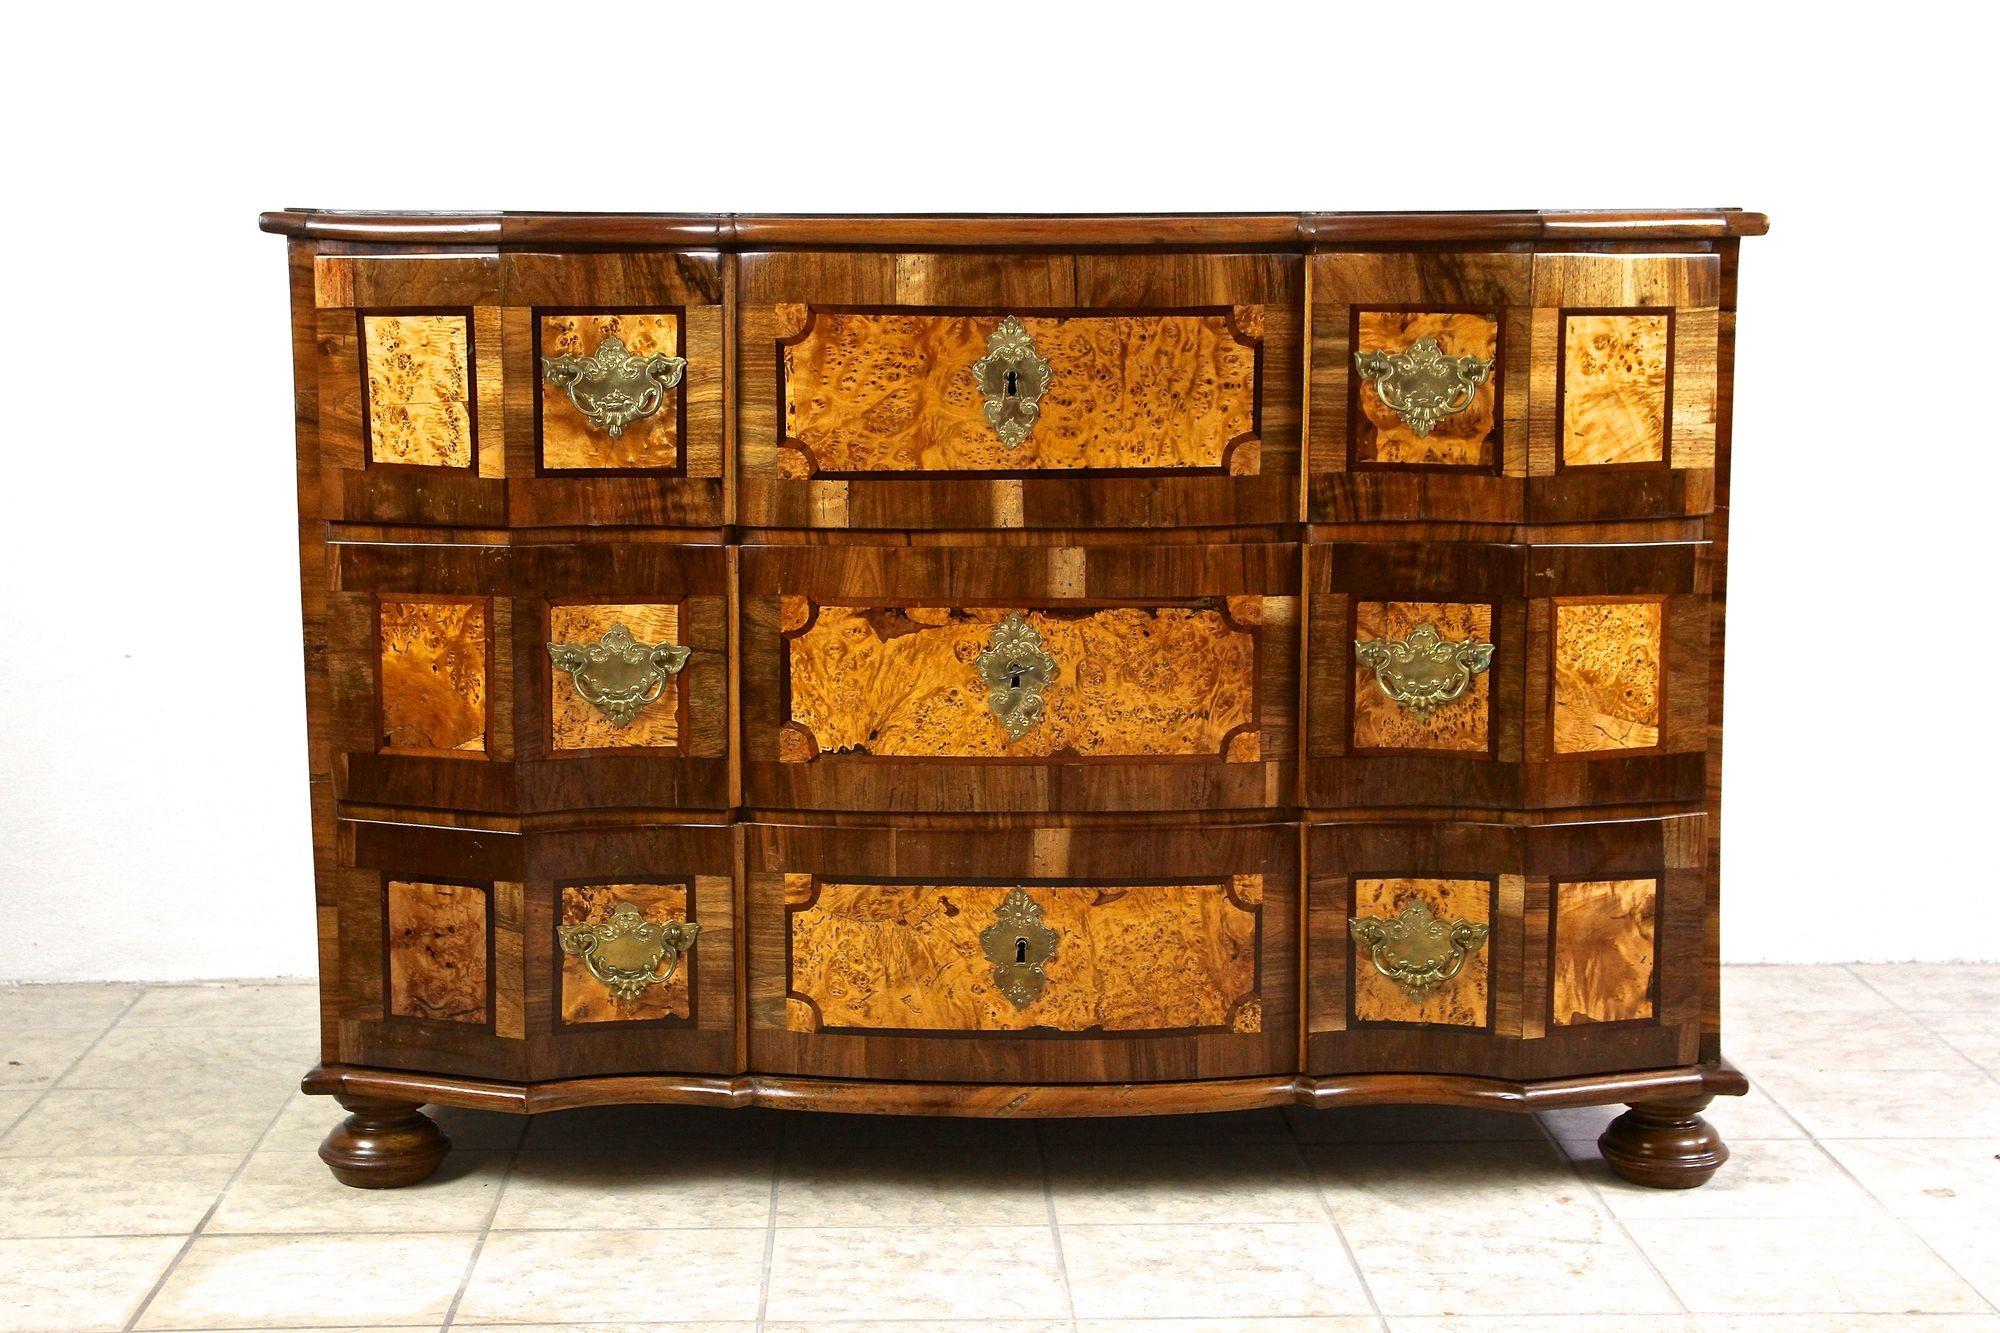 Outstanding baroque chest of drawers from the period in Austria around 1770. An absolutely beautiful late 18th century chest of drawers showing an exceptional design combining straight lines with soft curved shapes. The fine nut wood veneered